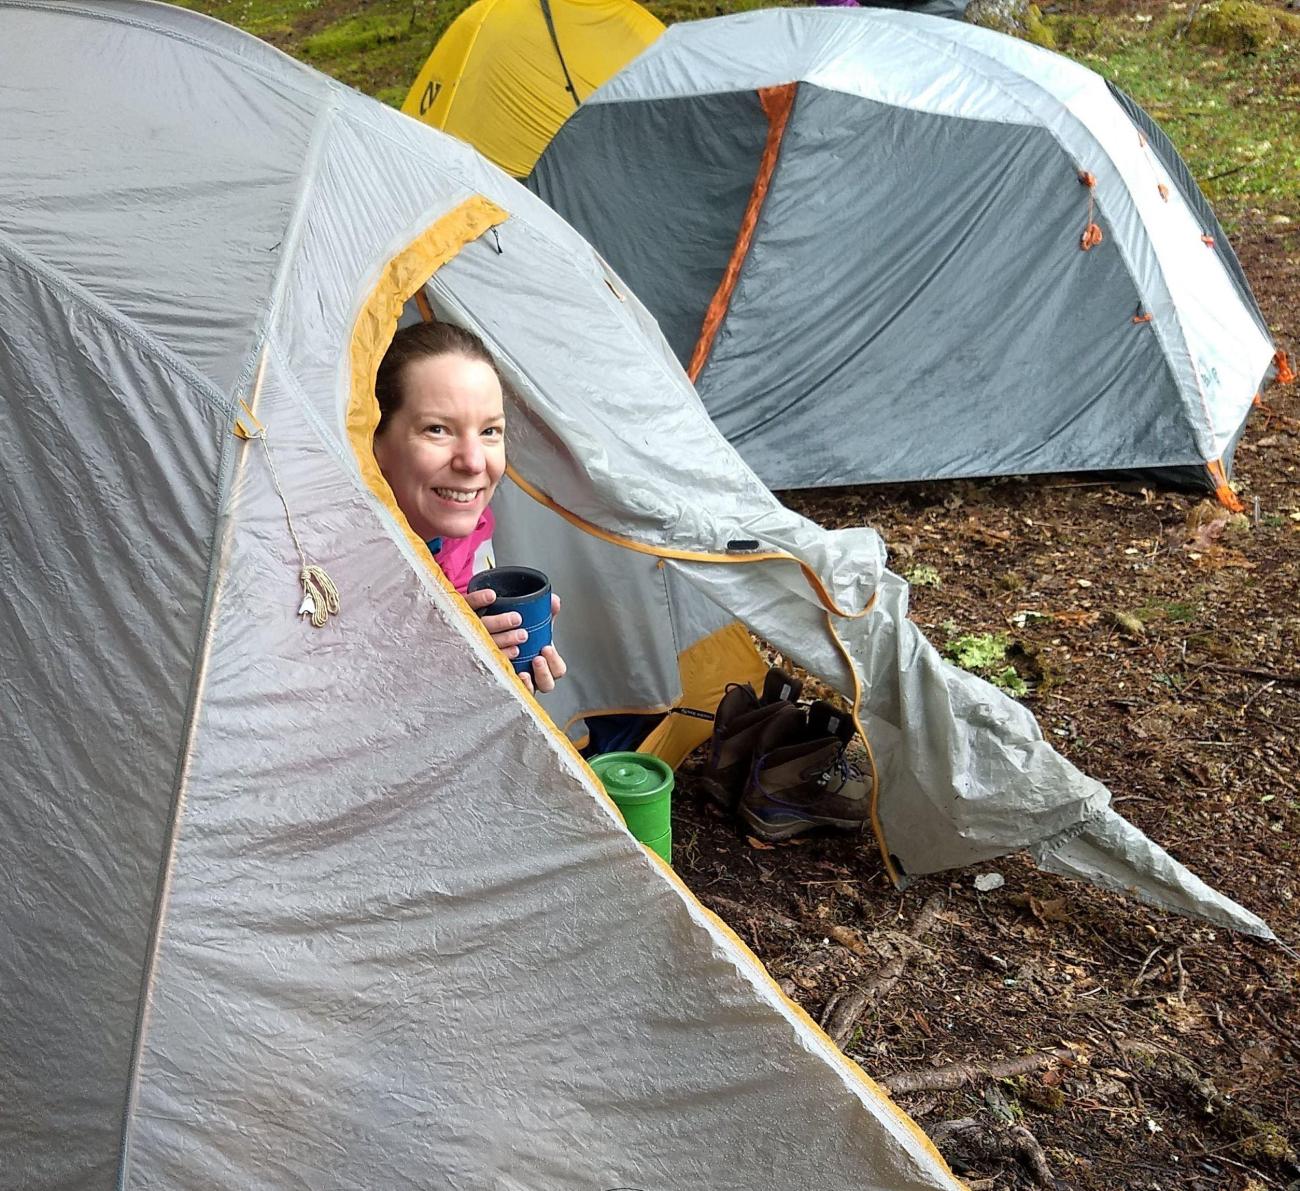 A person sticks their head out of their tent door with a beverage mug. A 2nd tent in the background